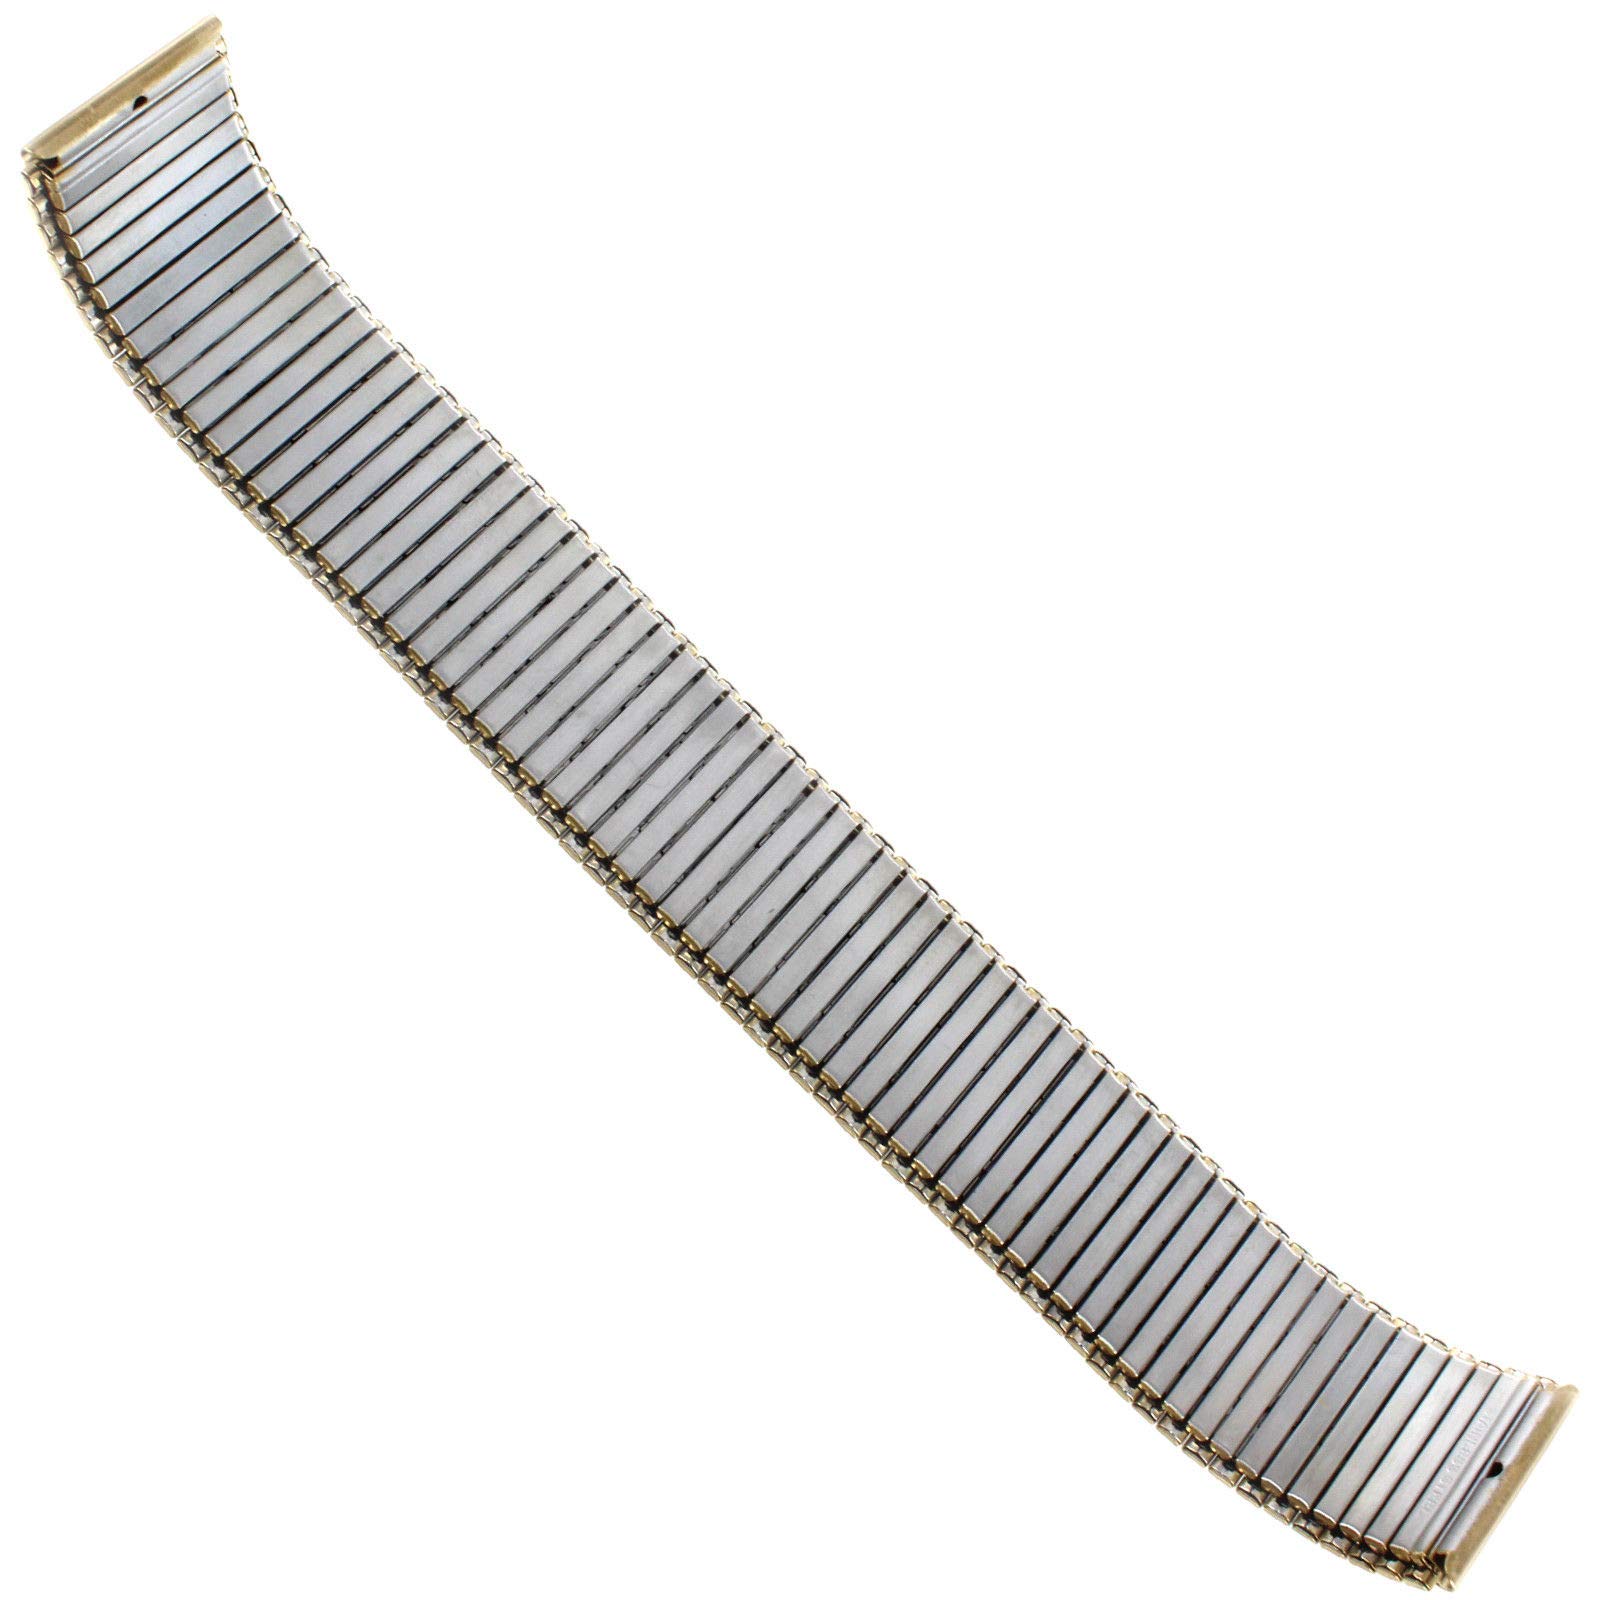 20mm Hirsch Gold Patterned Stainless Steel Mens Expansion Watch Band 513